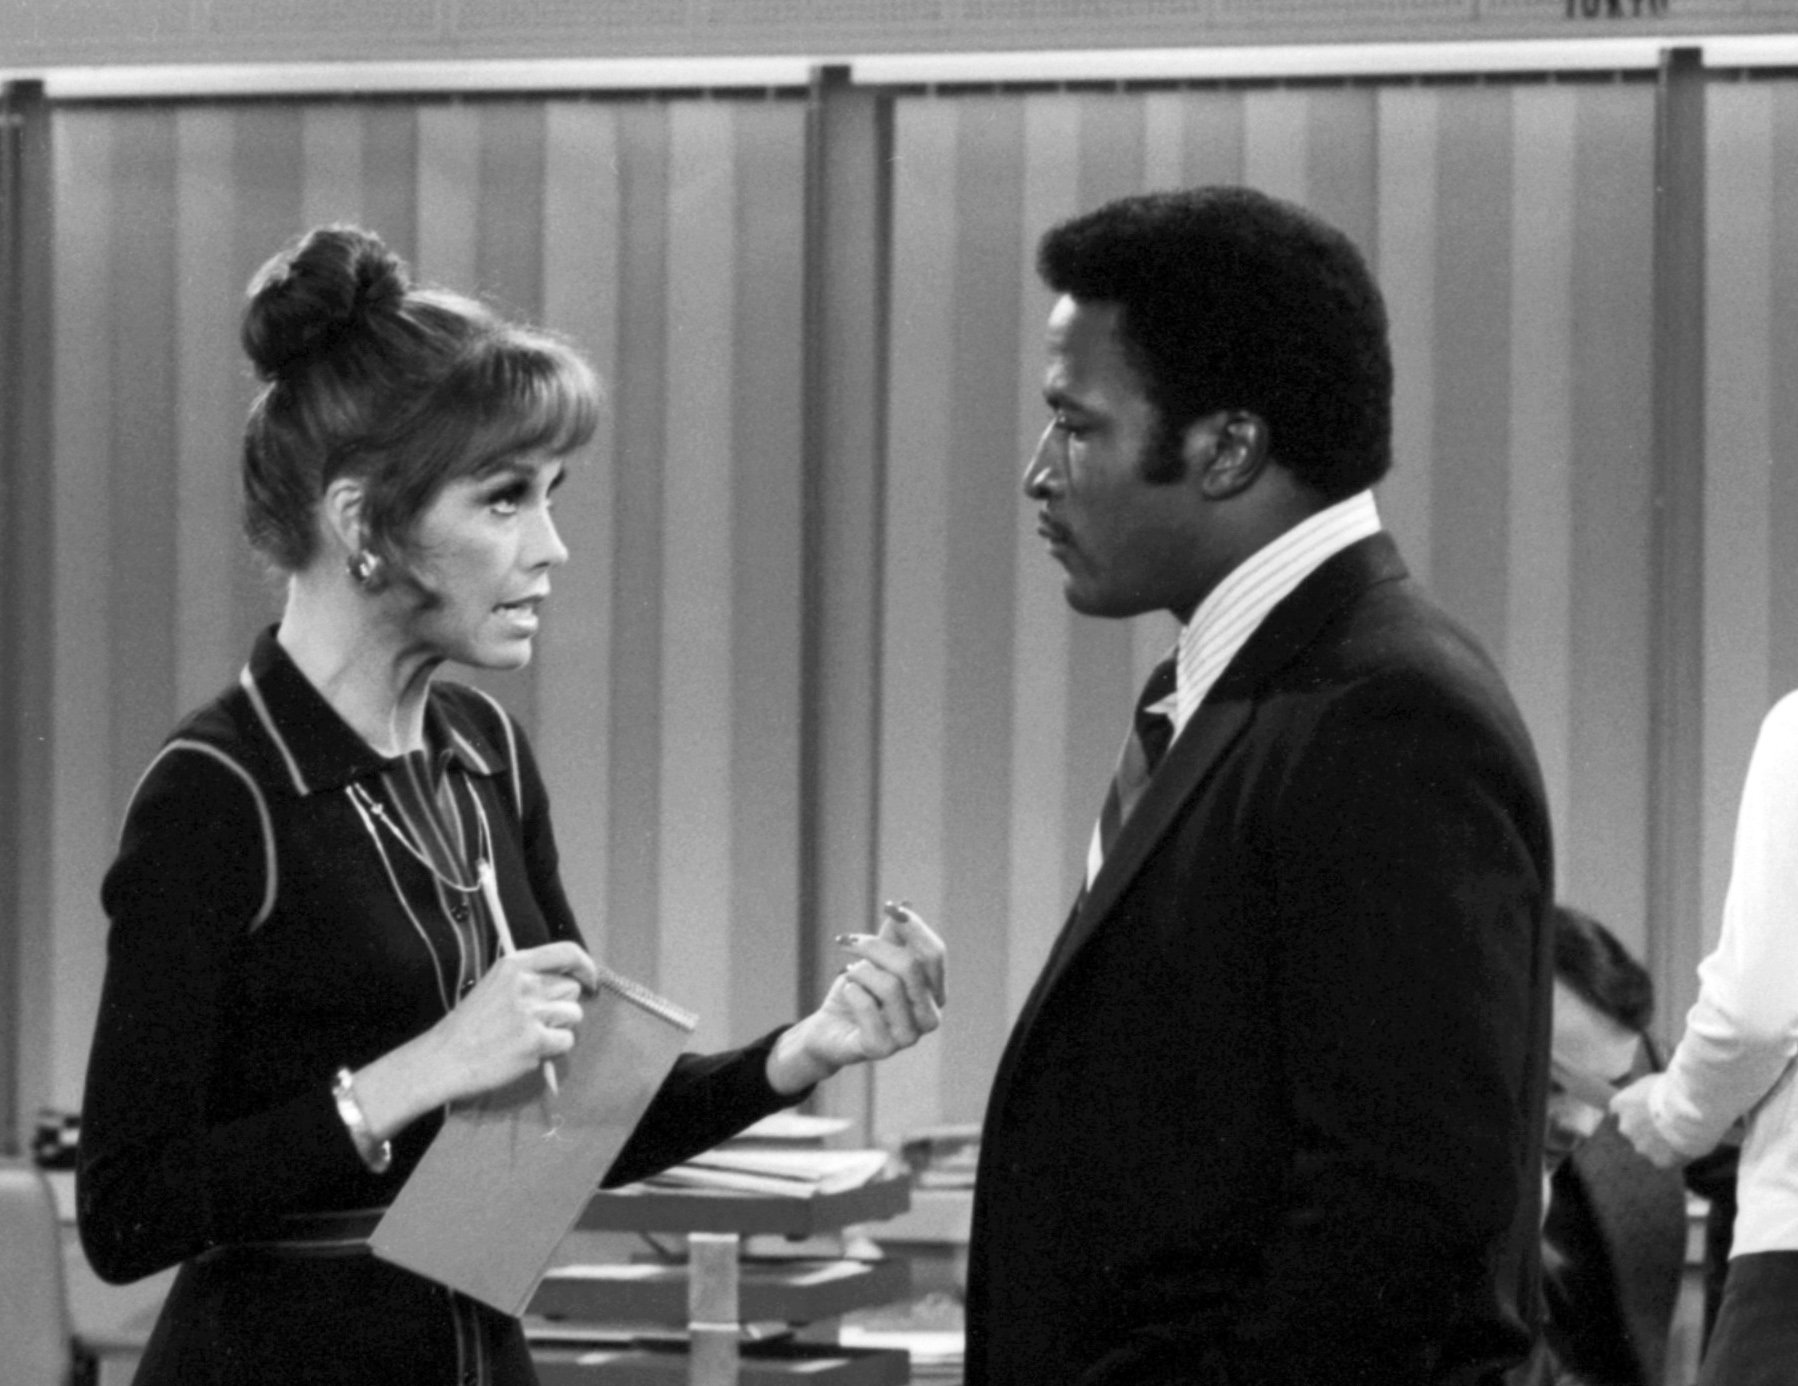 Mary Tyler Moore as Mary Richards, and John Amos as Gordy the Weatherman, on "The Mary Tyler Moore Show" on October 26, 1973. | Source: CBS/Getty Images